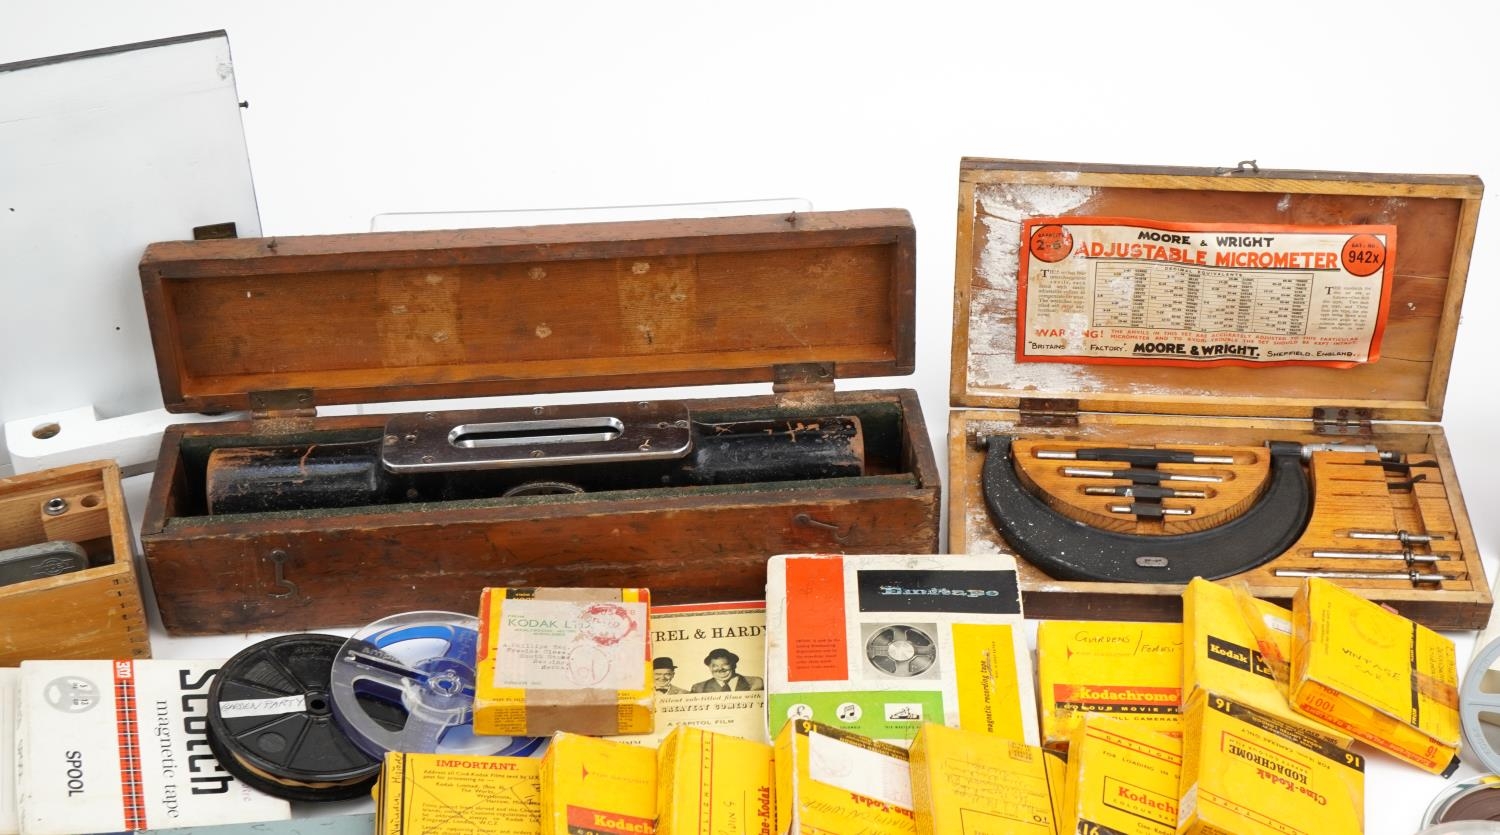 Collection of vintage and later tools, optical instruments, Eumig projector and reels including a - Image 3 of 6